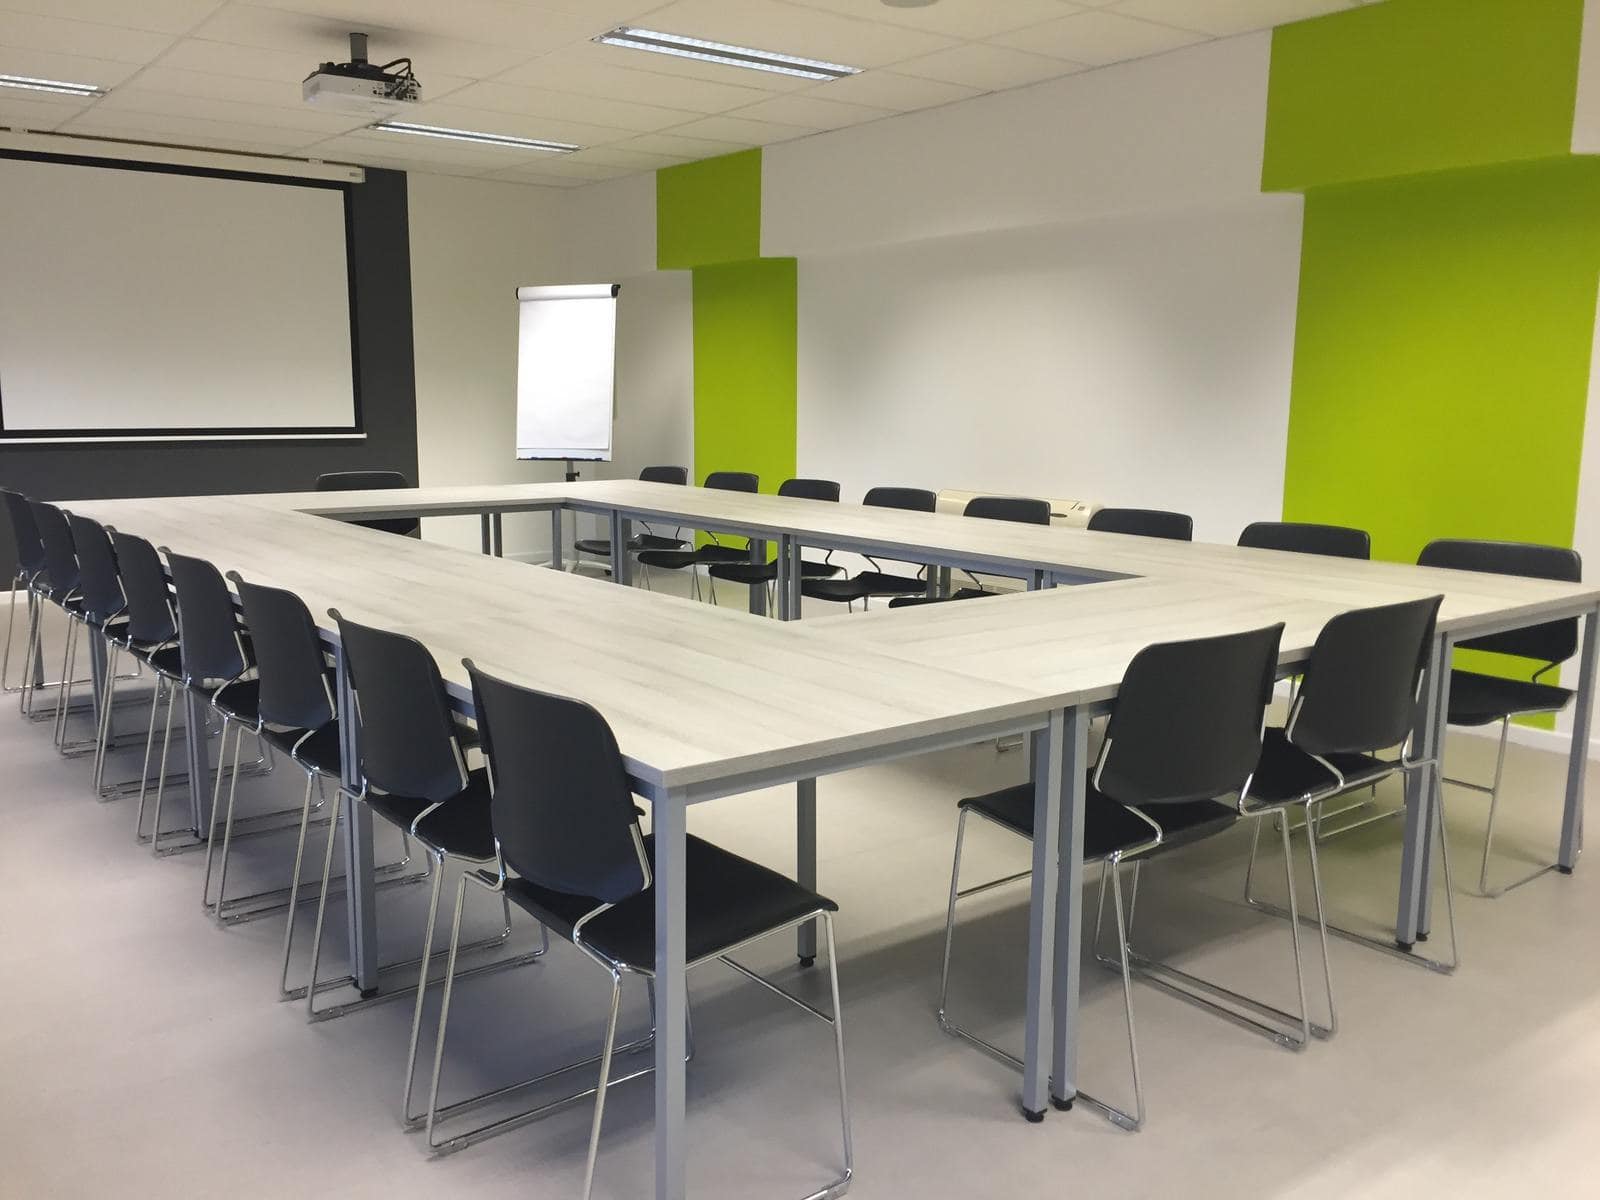 An empty conference room exemplifies the cost of useless meetings